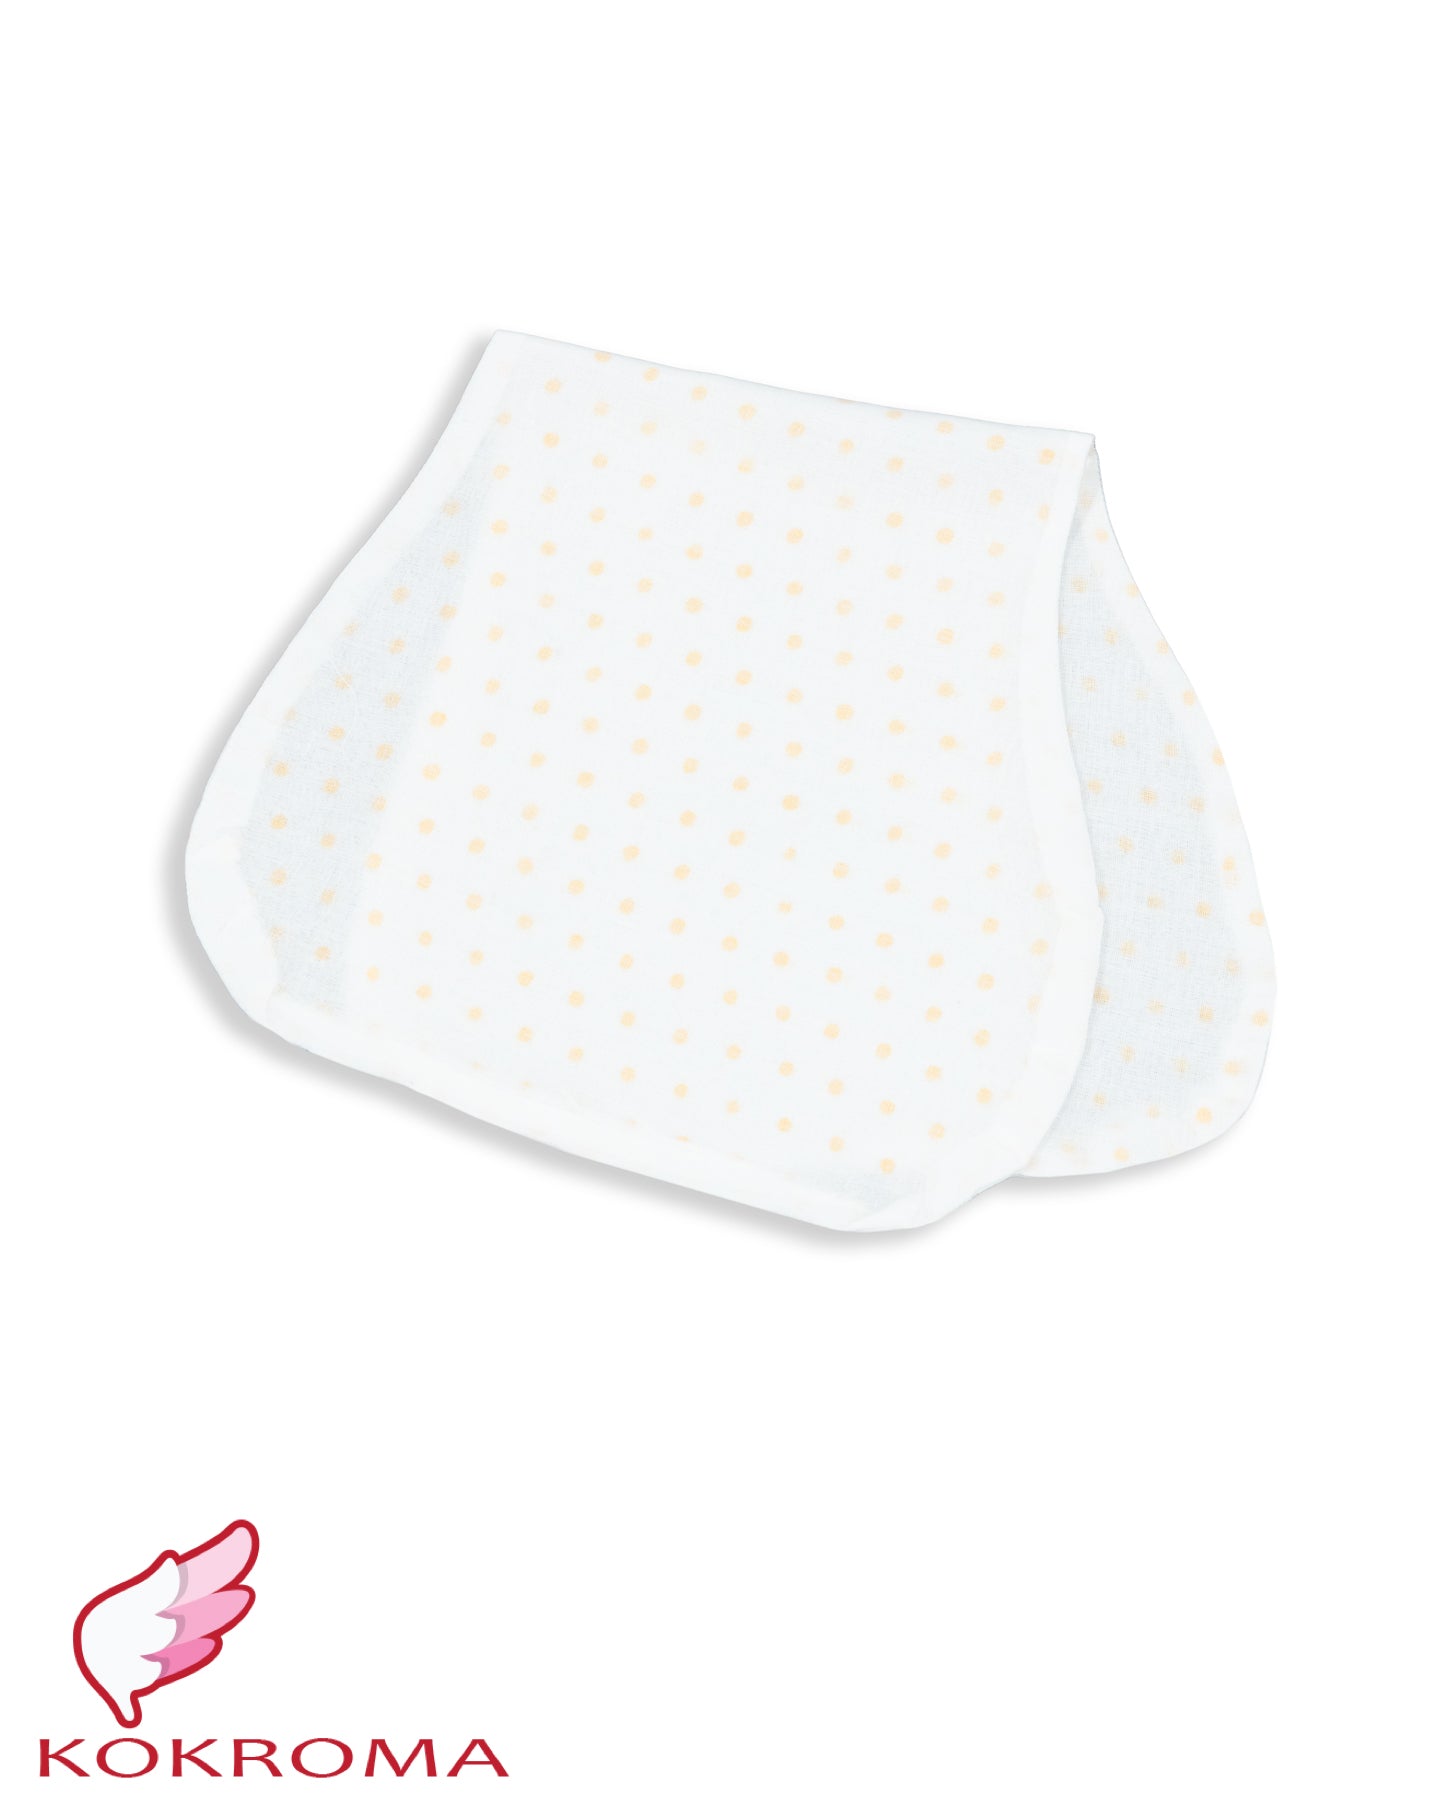 Triple gauze muslin burp cloths are ideal for the early year of newborn babies. Contoured to sit over the shoulder, the soft muslin cotton stops it from slipping. Three layers of fabric make it very comfortable for your little baby to rest their head, and protect your clothing from little burping deposits! Yellow Small Dot